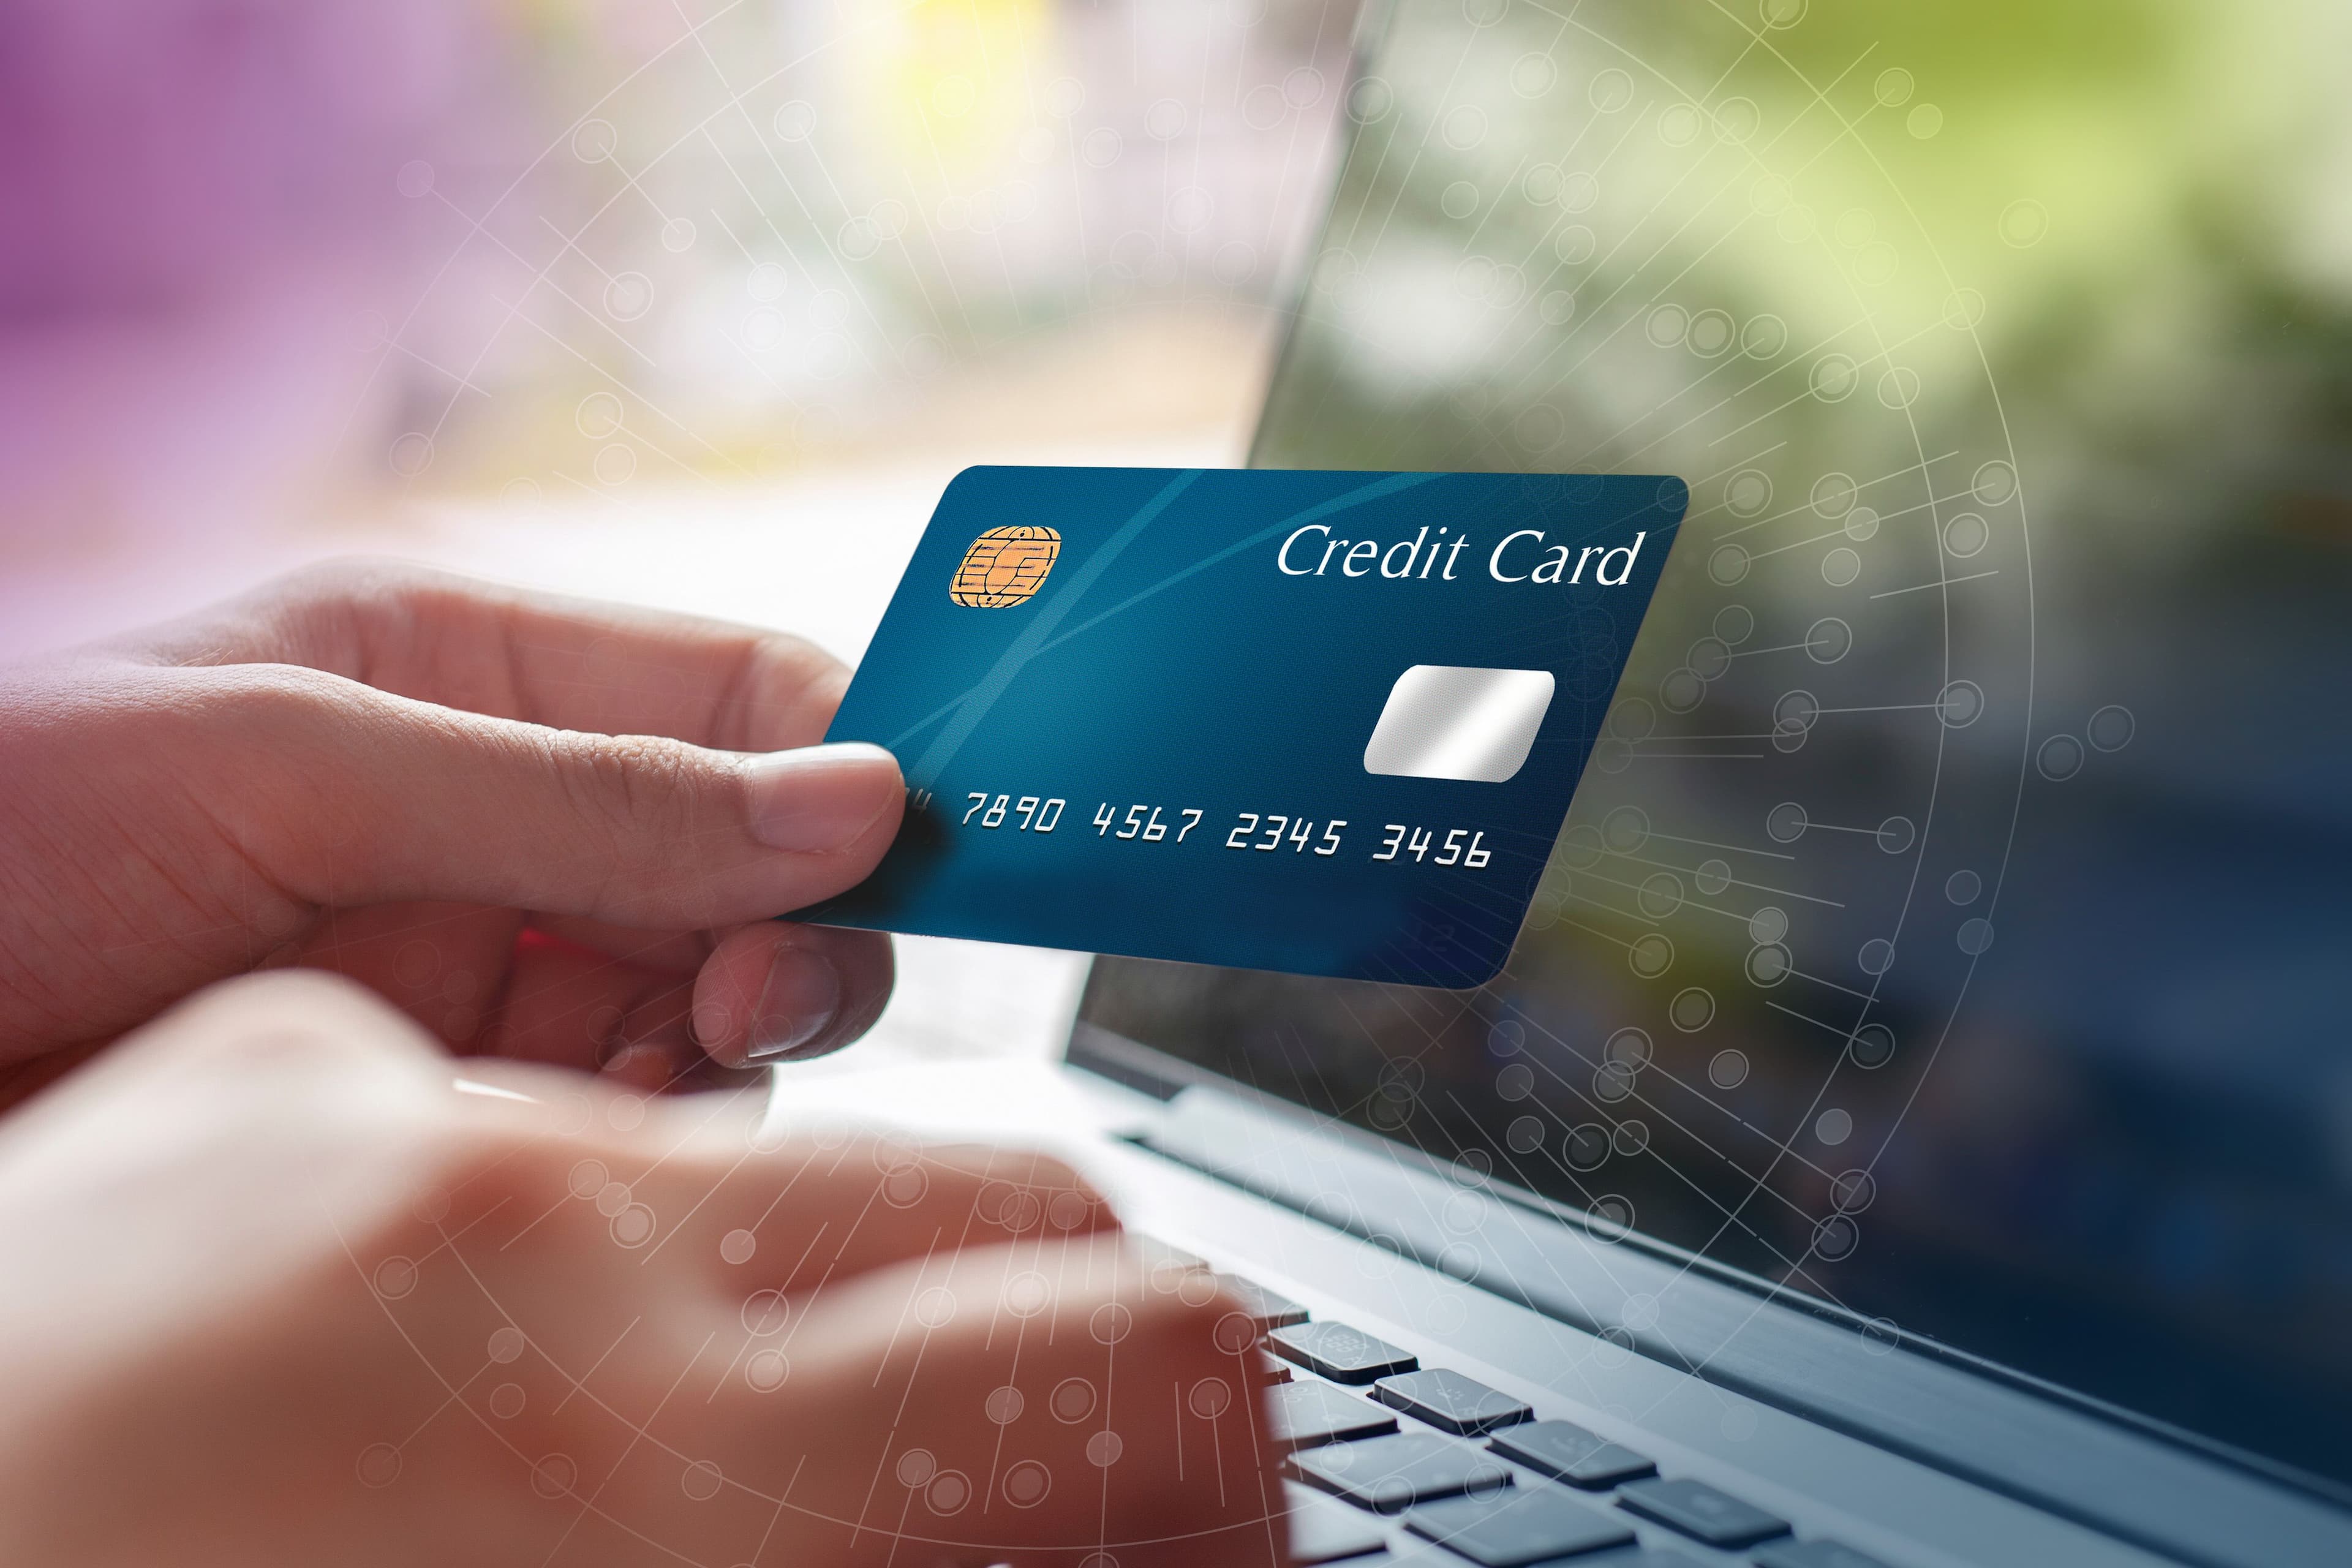 "Credit Union ONE Restarts Its Card Program and Posts Industry-Leading Growth in Accounts and Balances post thumbnail"